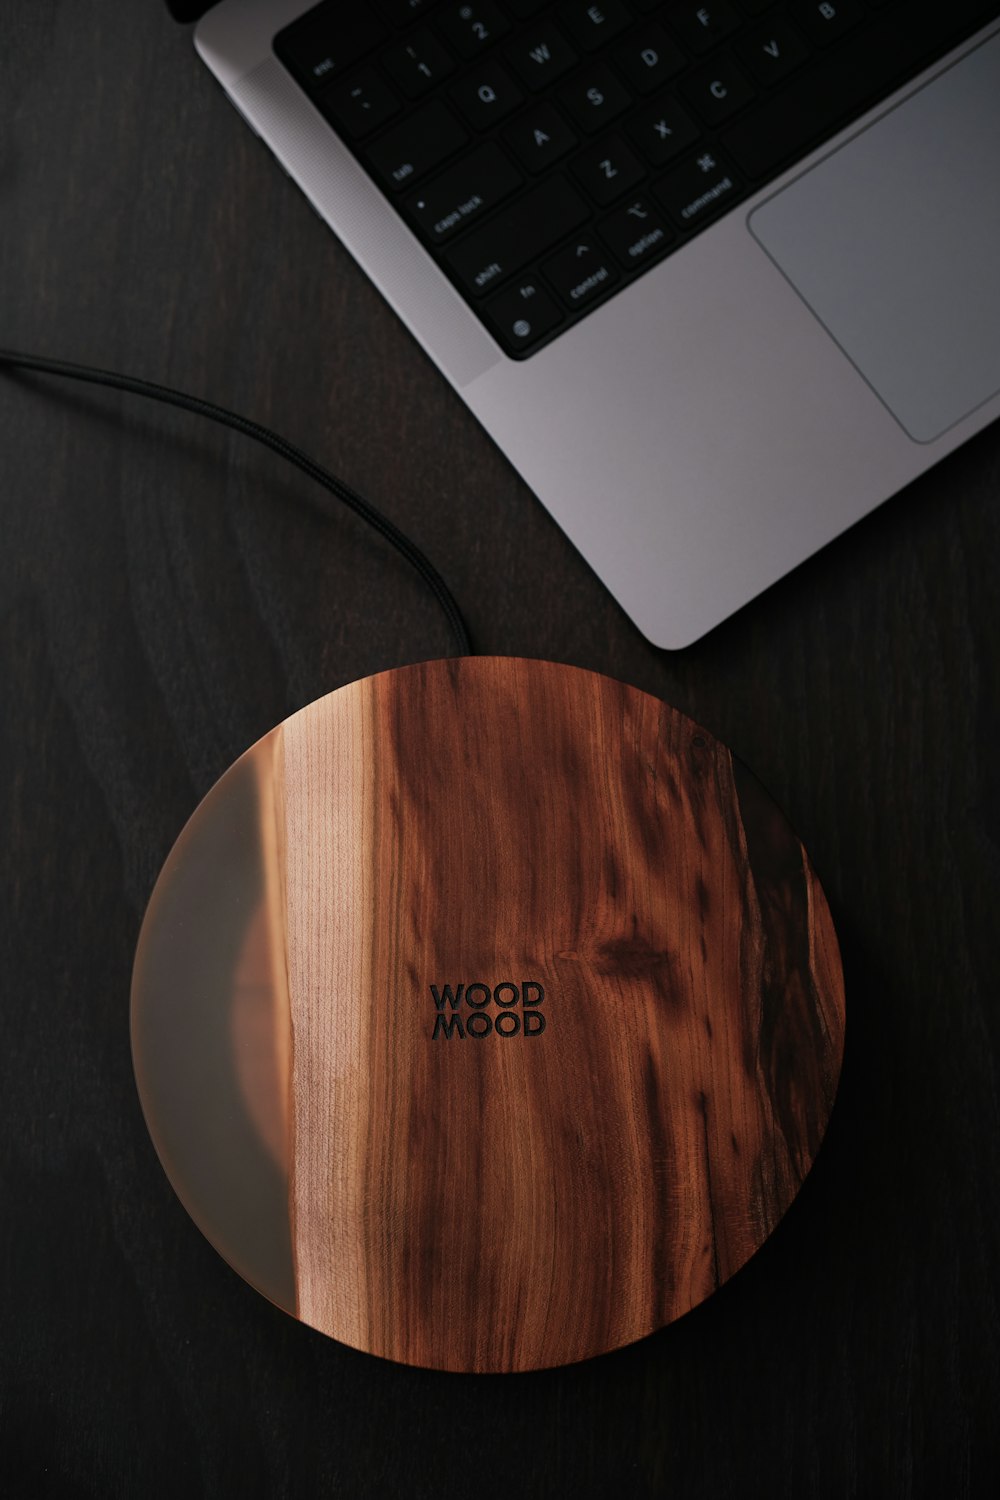 a wooden mouse pad sitting next to a laptop